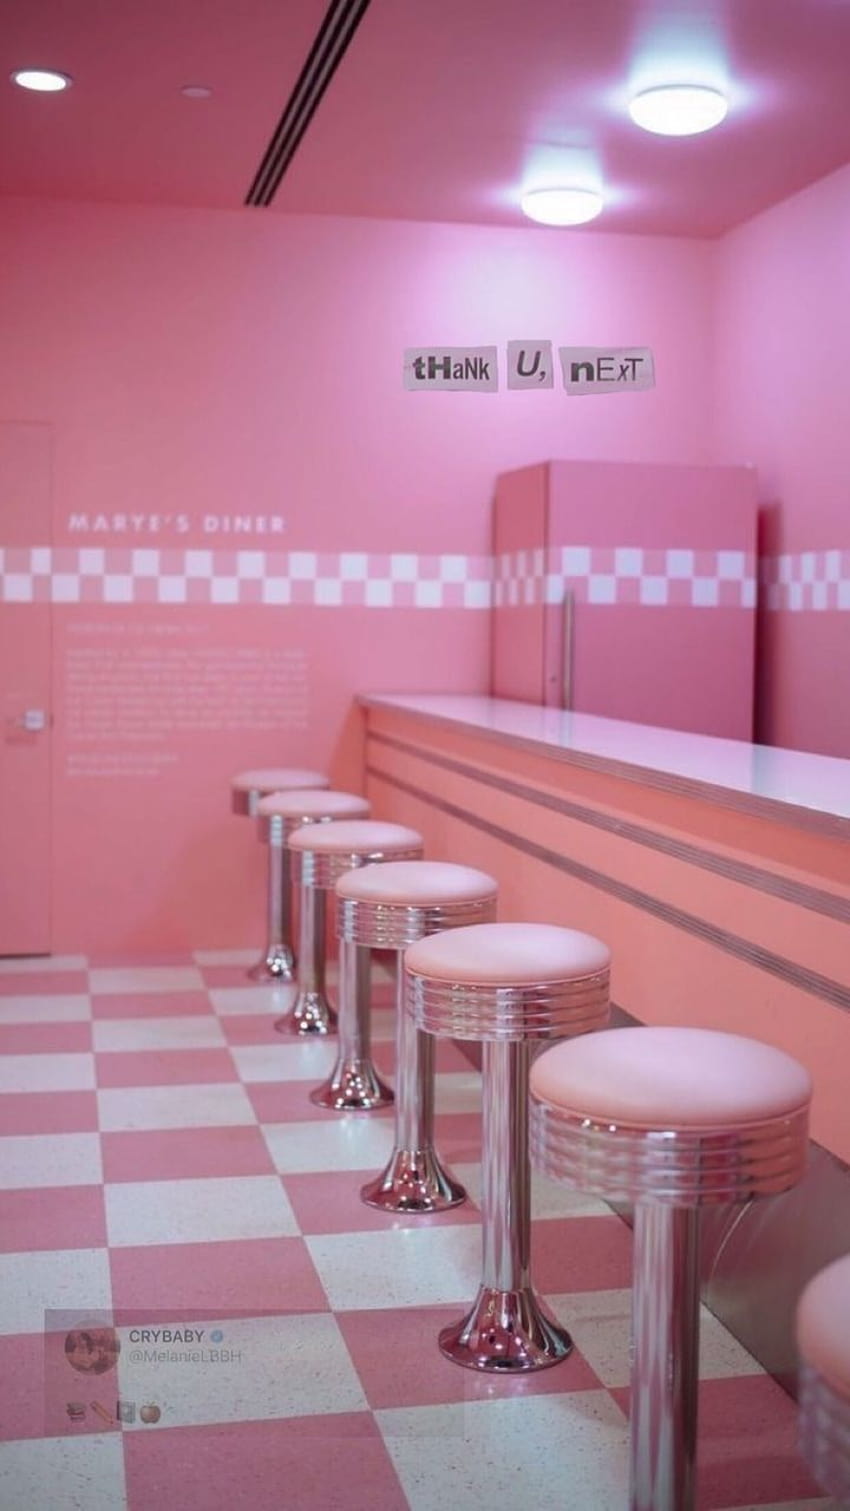 A pink room with checkered floors and stools - Melanie Martinez